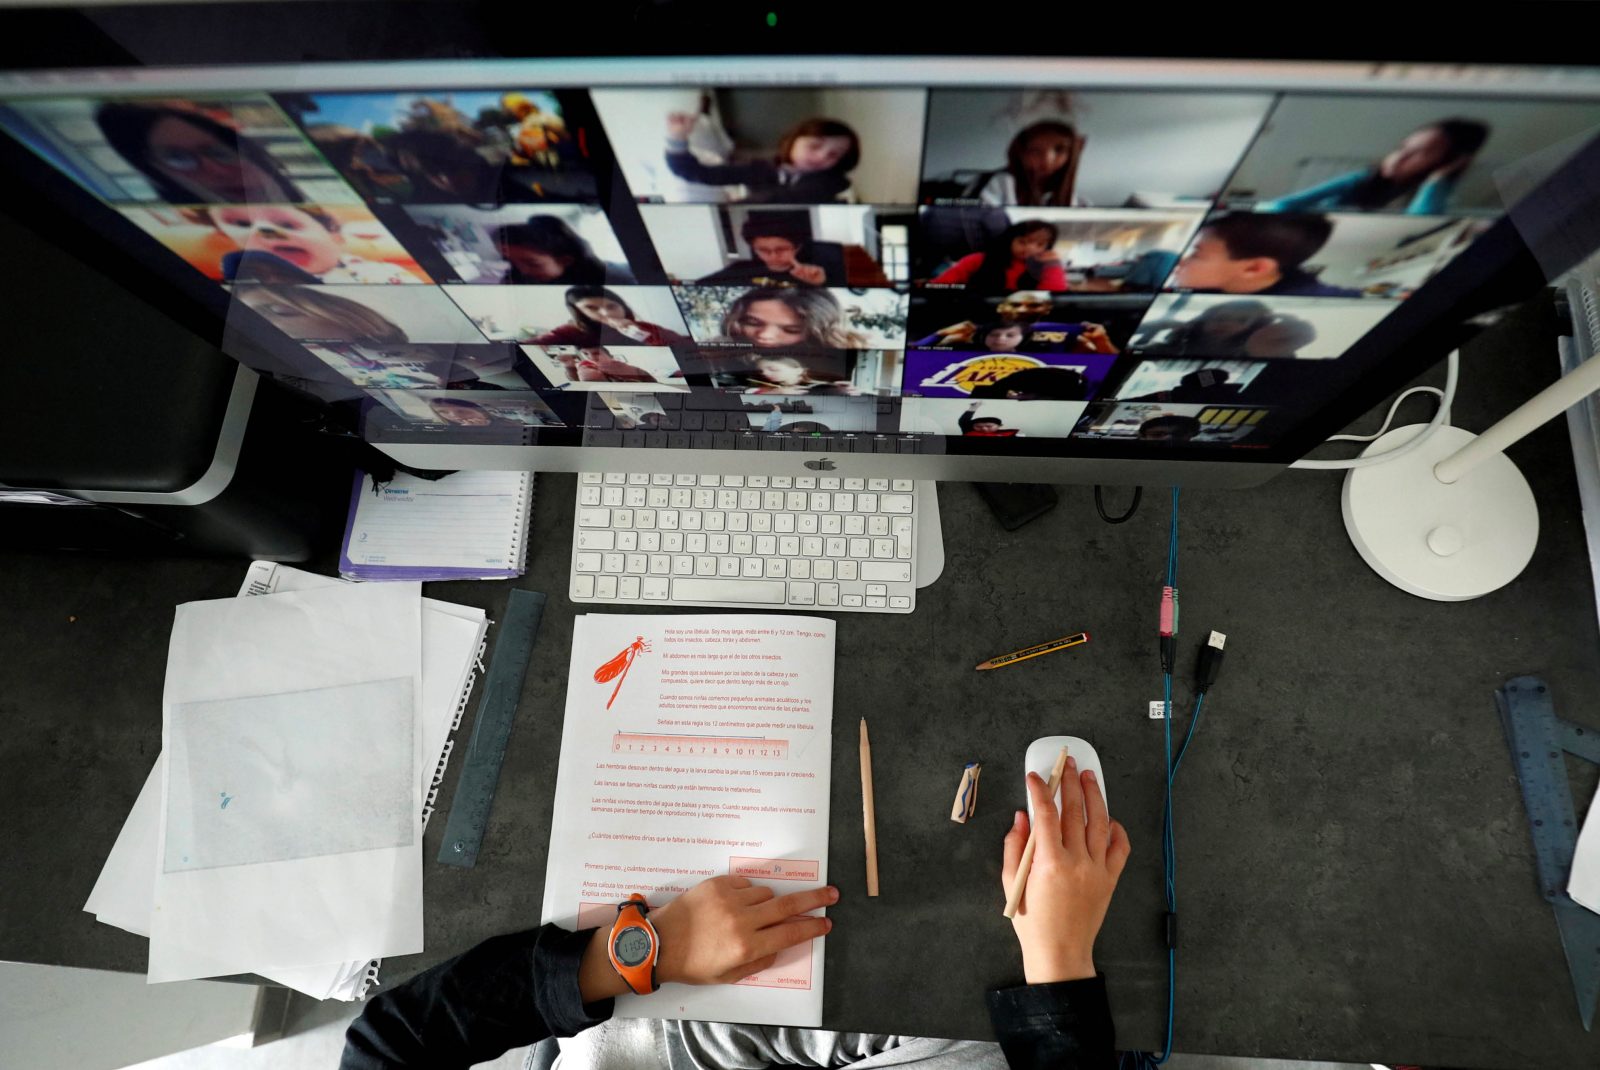 A student takes classes online with his companions using the Zoom app at home in El Masnou, north of Barcelona, Spain April 2, 2020. REUTERS/Albert Gea